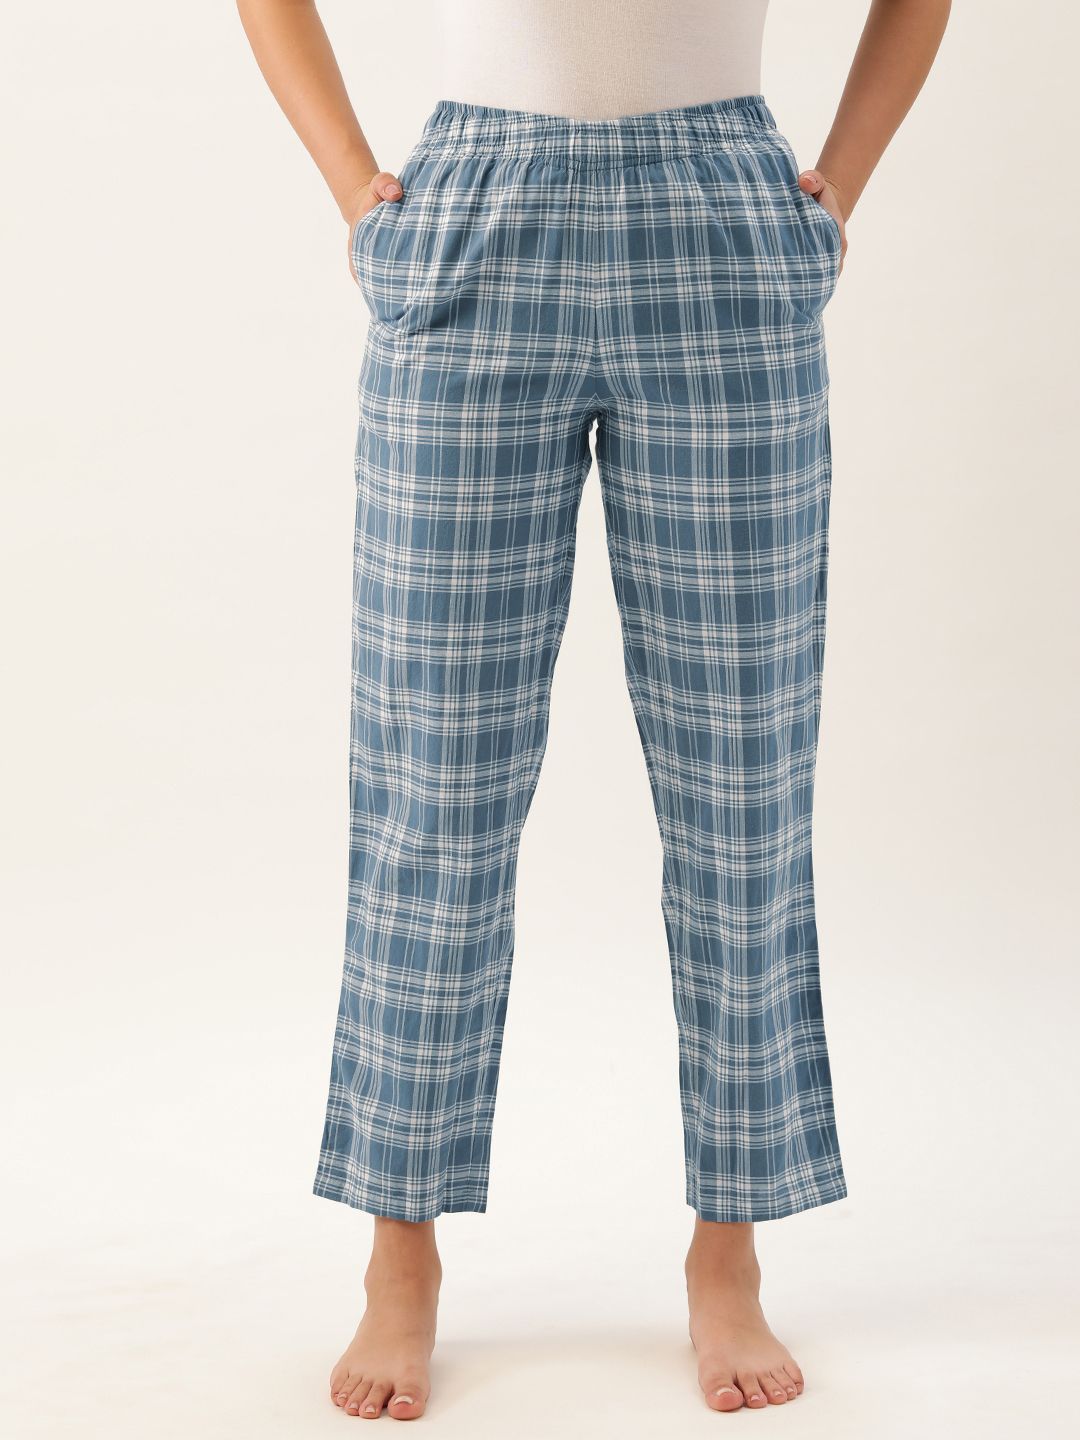 Clt.s Women Blue & White Checked Pure Cotton Lounge Pants Price in India